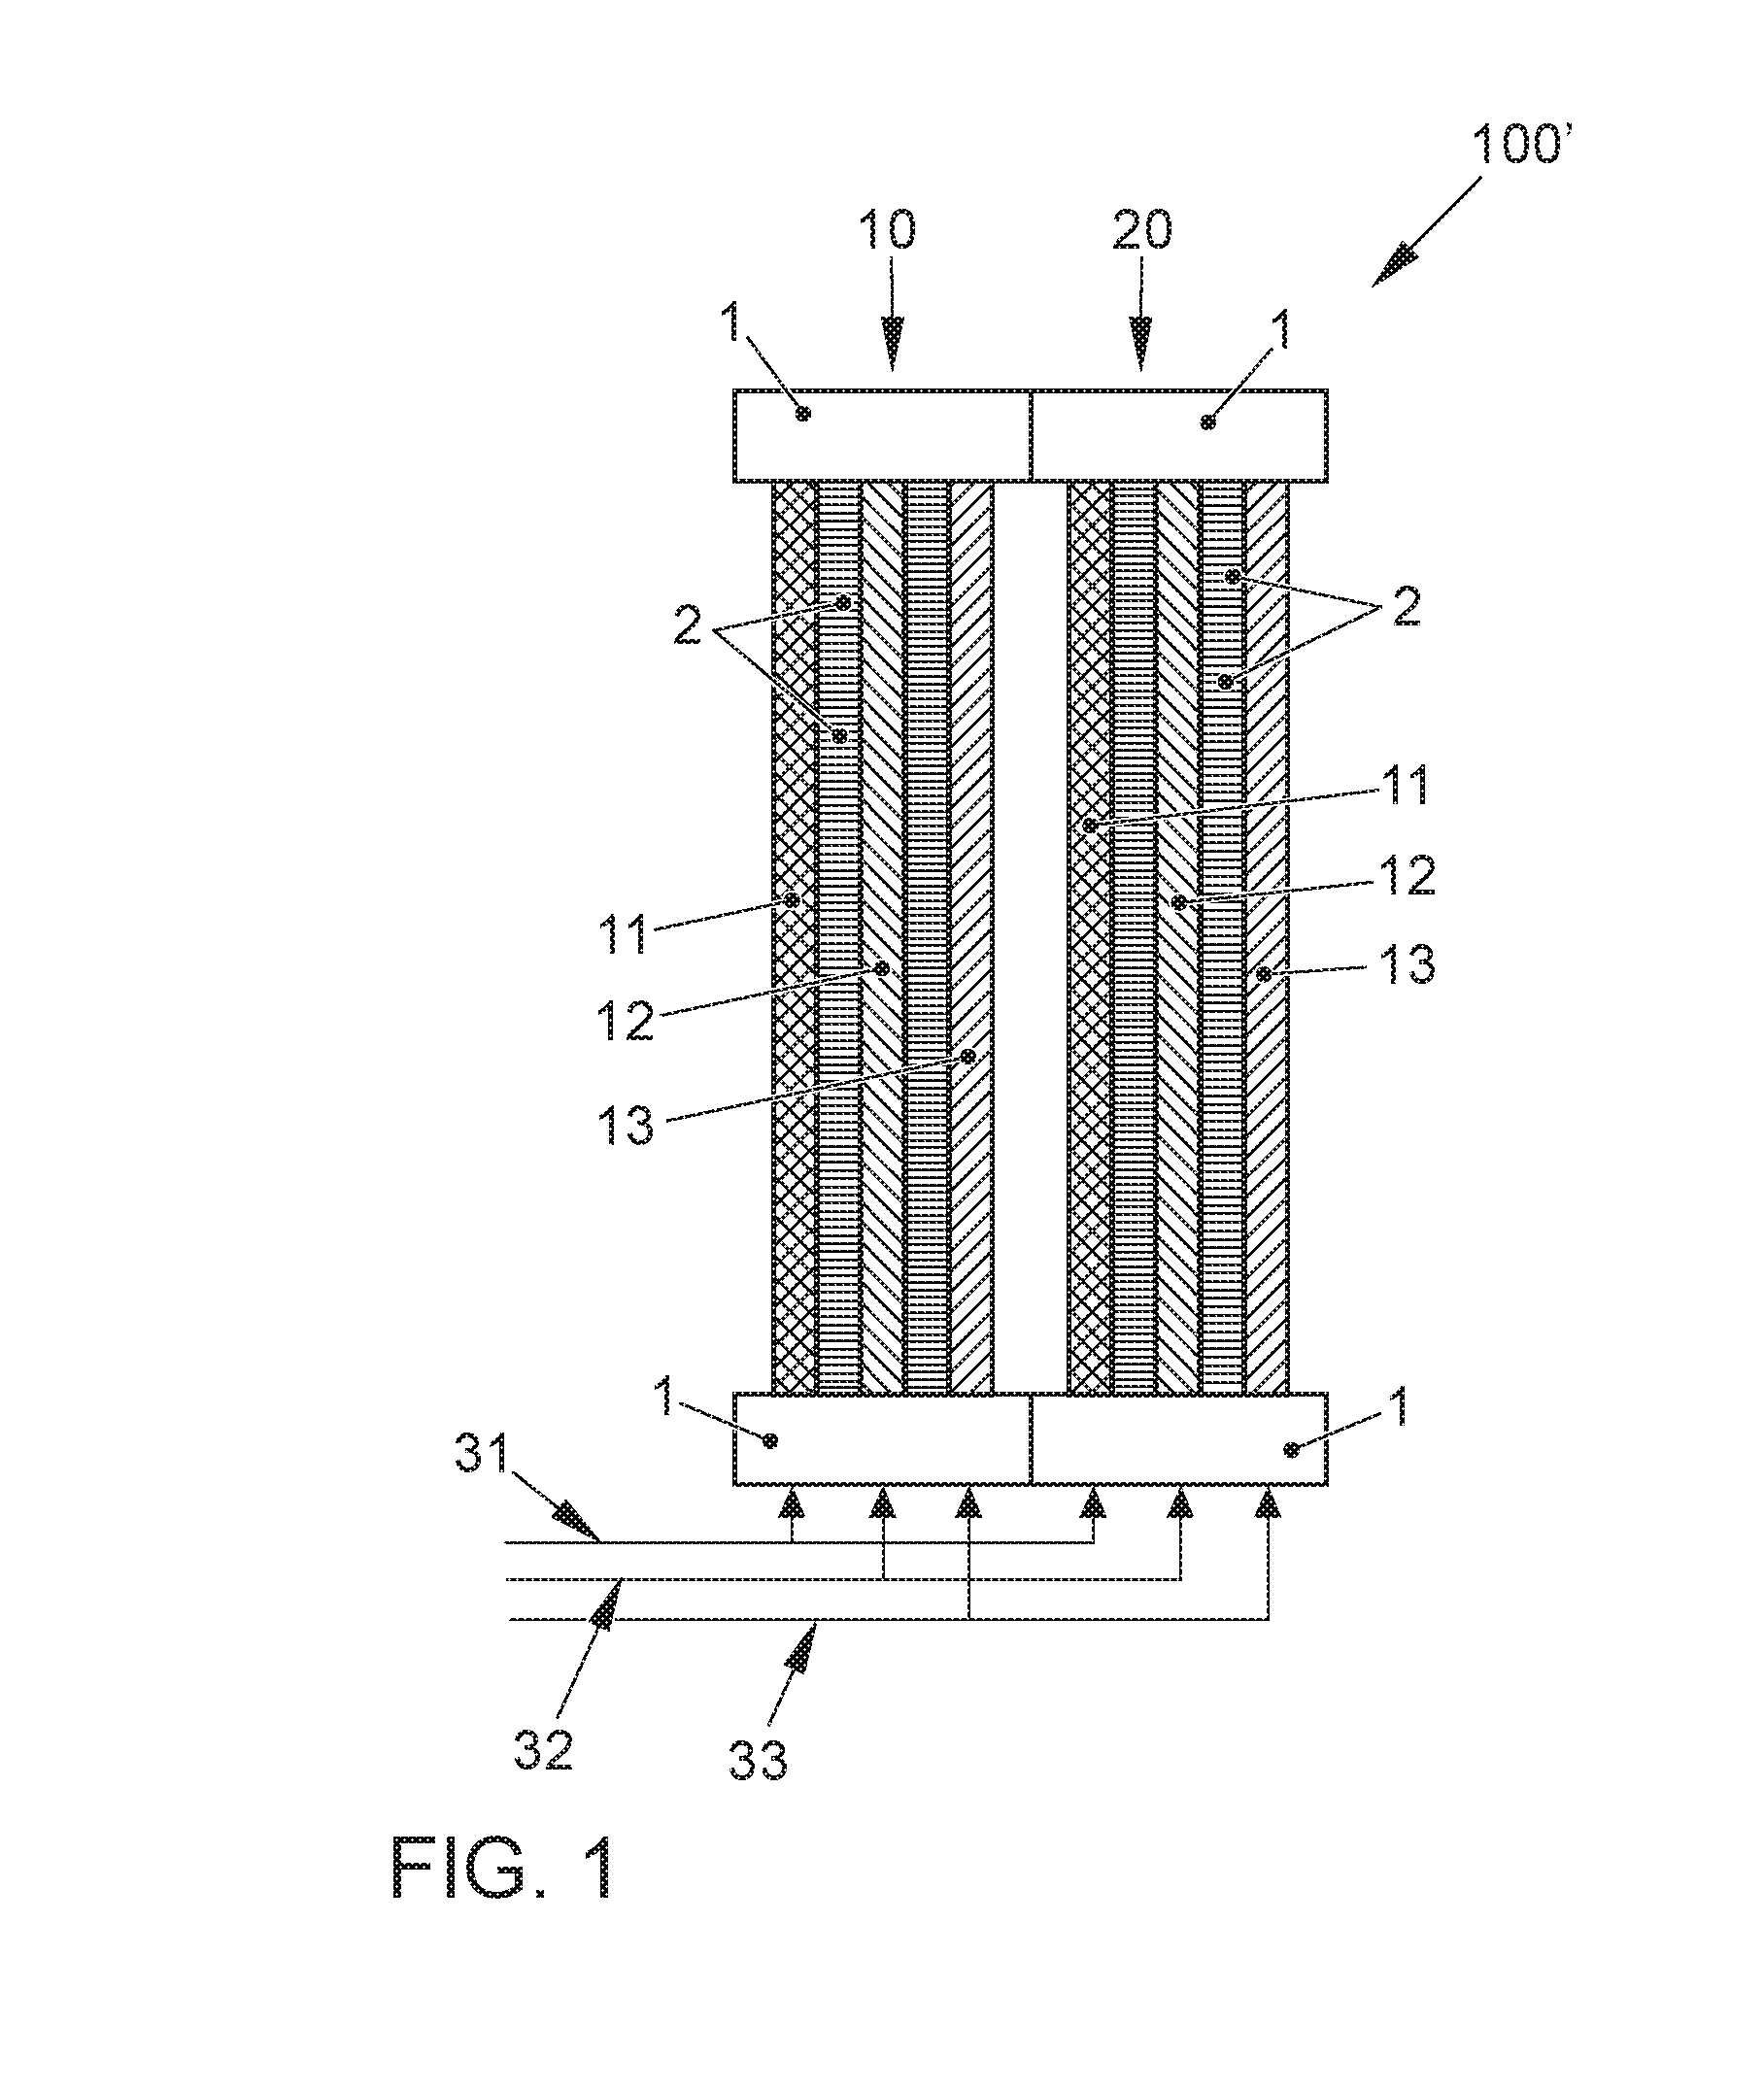 Fuel cell system including multiple fuel cell stacks